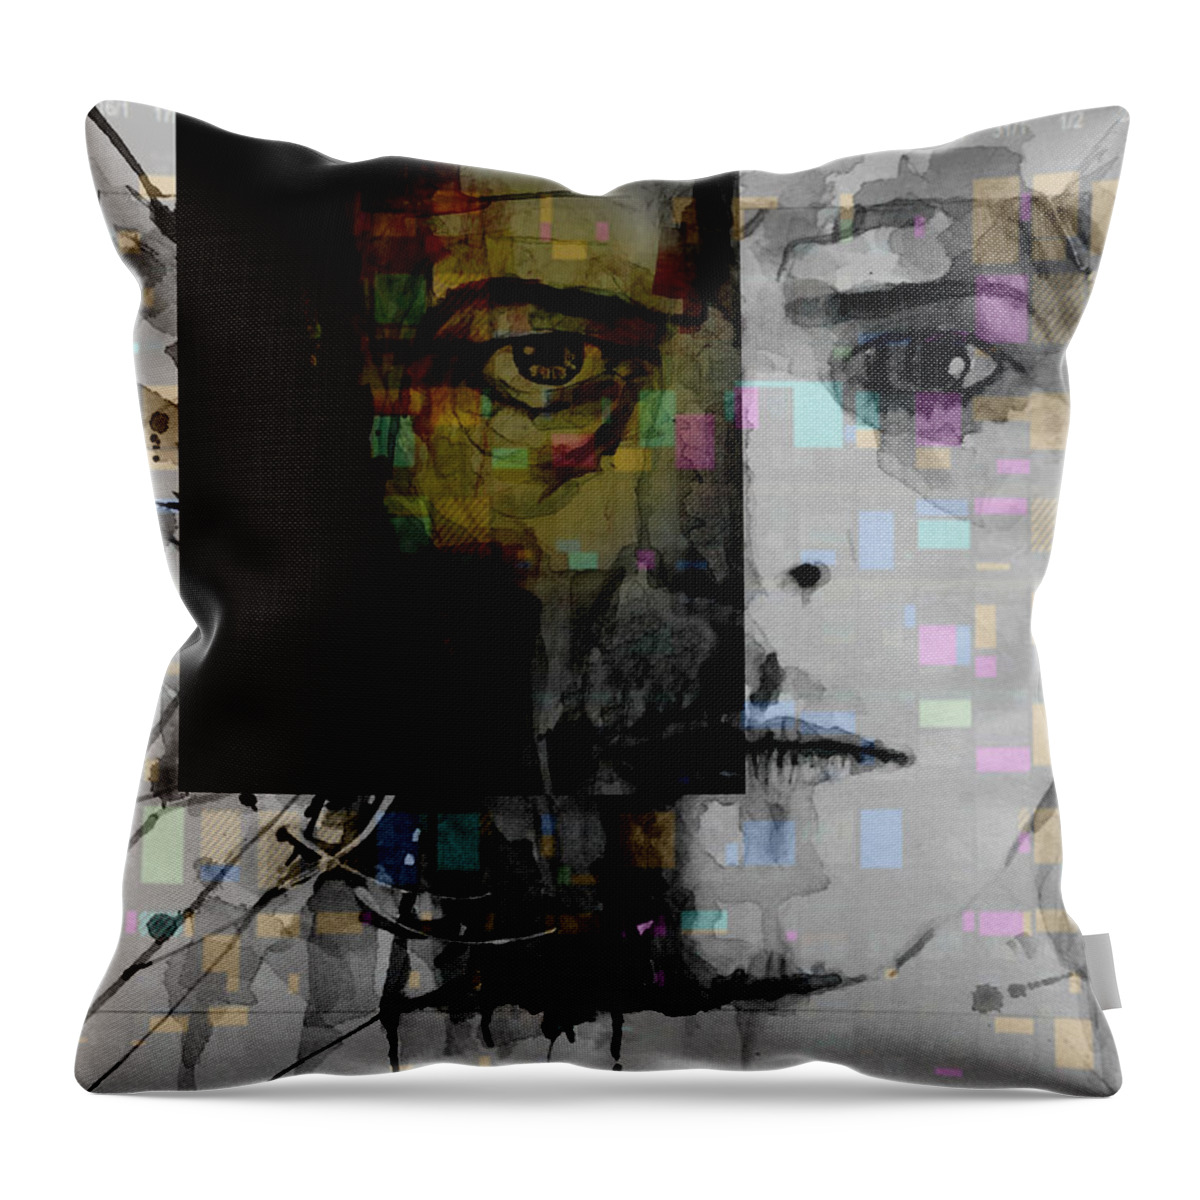 Bowie Throw Pillow featuring the painting Dark Star by Paul Lovering